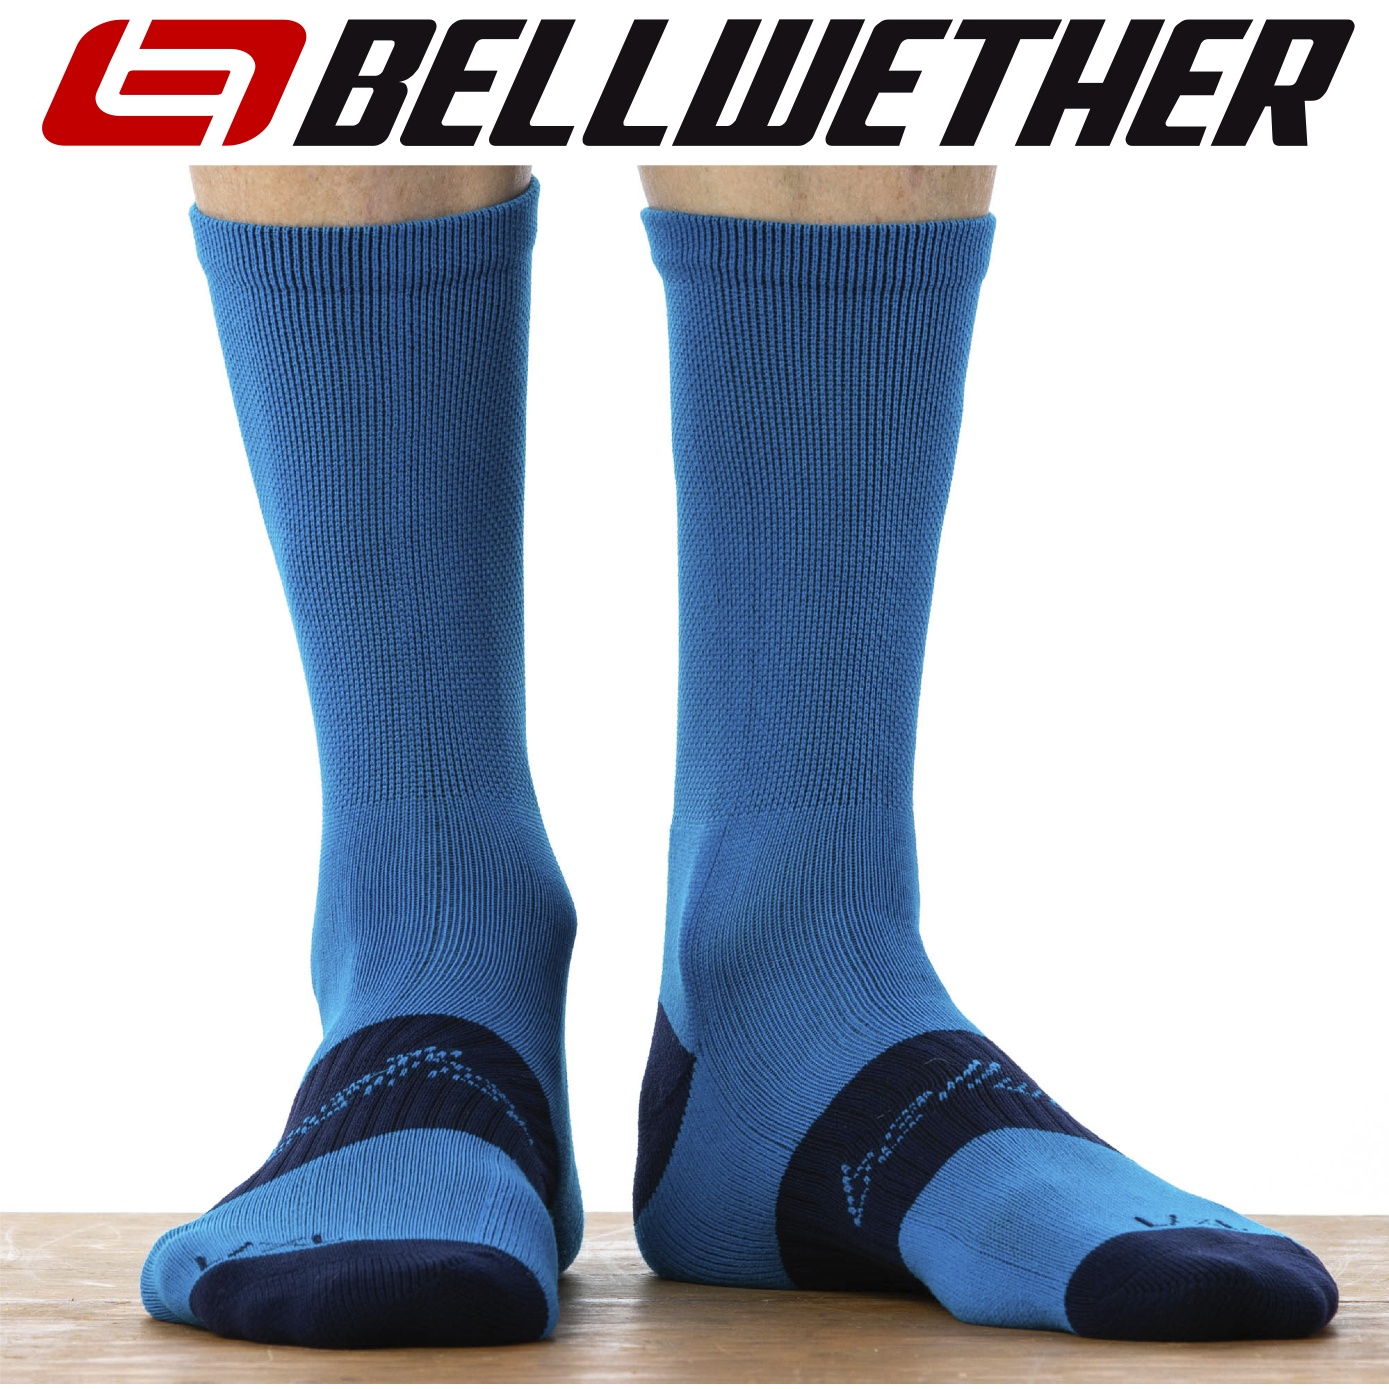 994401663-P Bellwether Tempo Sock Cyan 